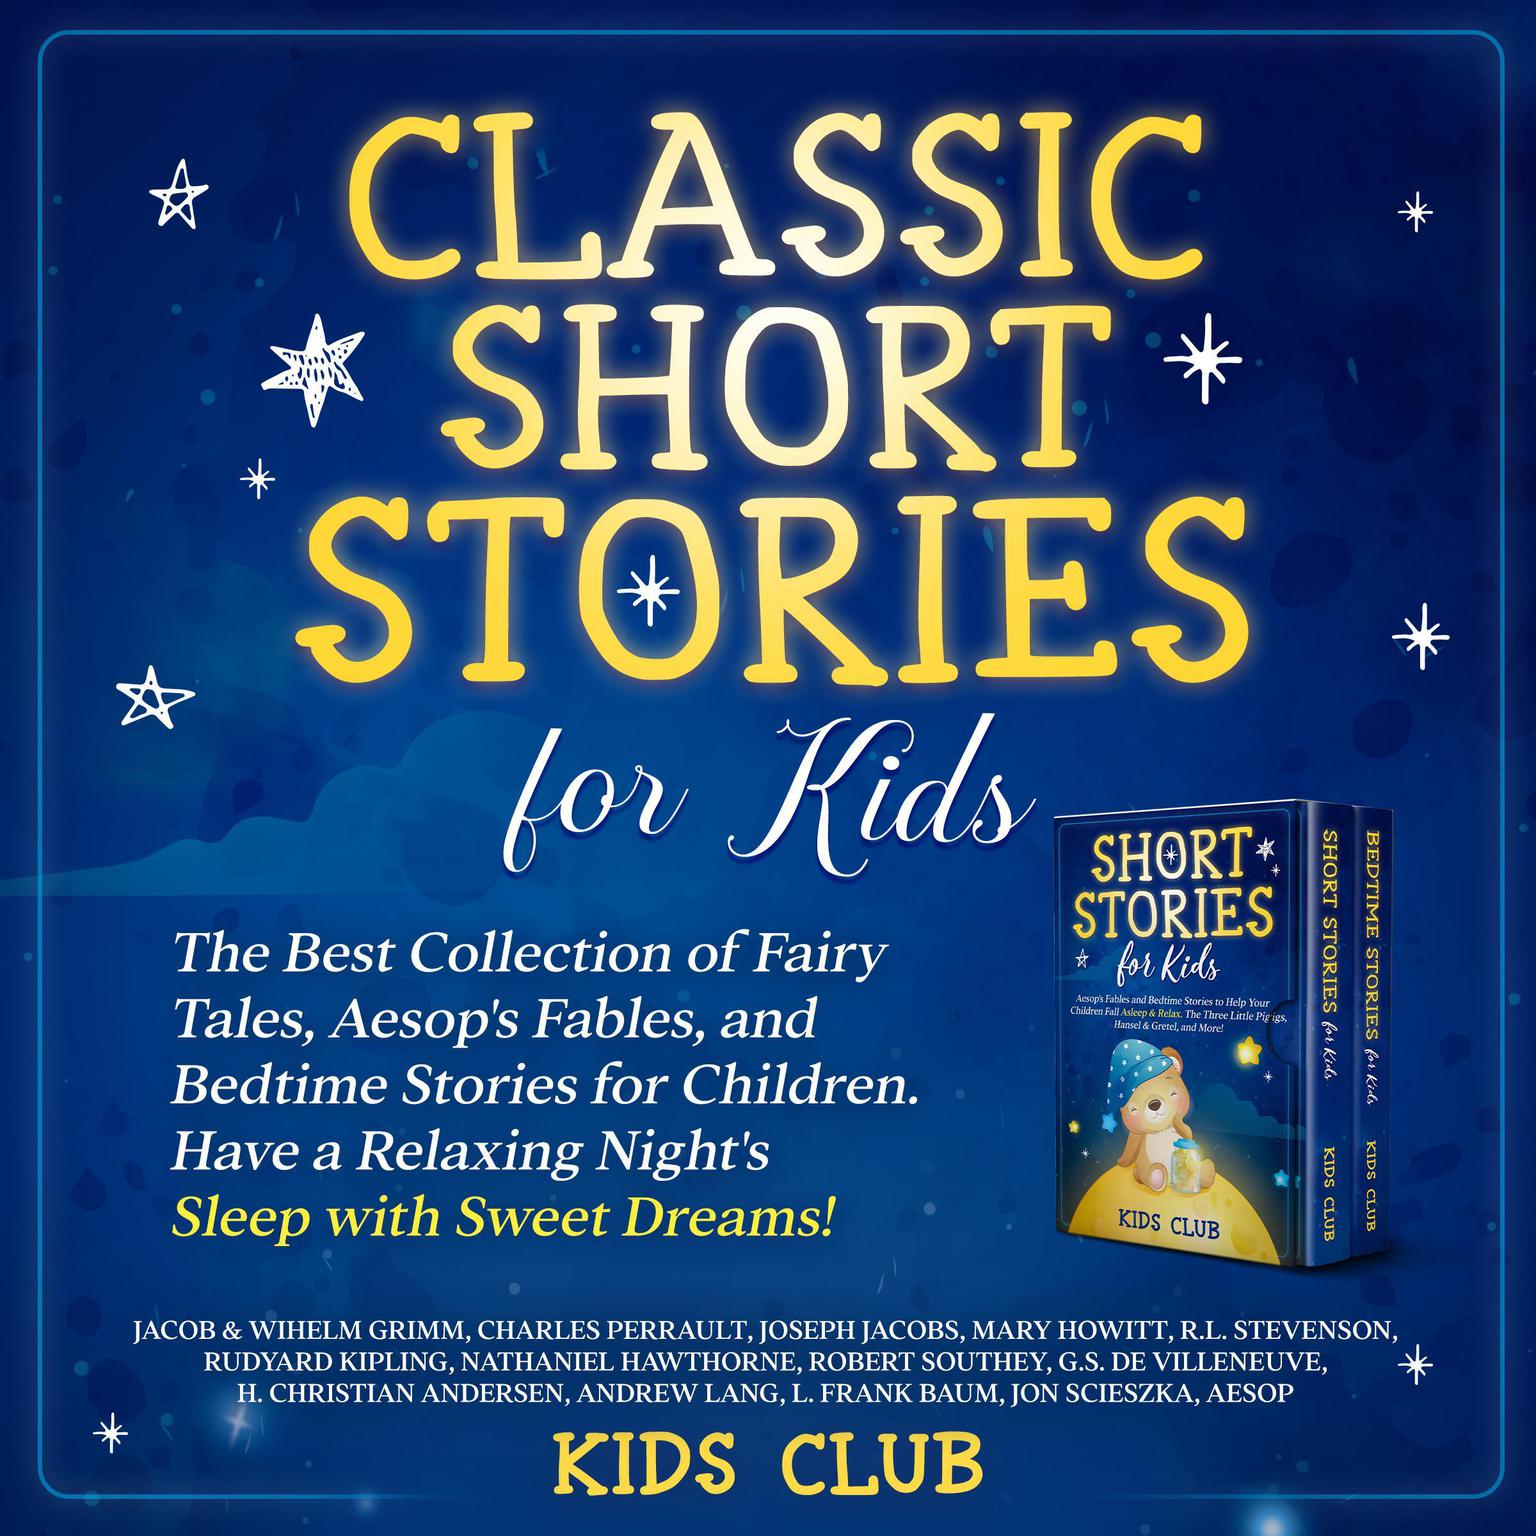 Classic Short Stories for Kids: The Best Collection of Fairy Tales, Aesops Fables, and Bedtime Stories for Children. Have a Relaxing Nights Sleep with Sweet Dreams!: The Best Collection of Fairy Tales, Aesops Fables, and Bedtime Stories for Children. Have a Relaxing Nights Sleep with Sweet Dreams! Audiobook, by Kids Club